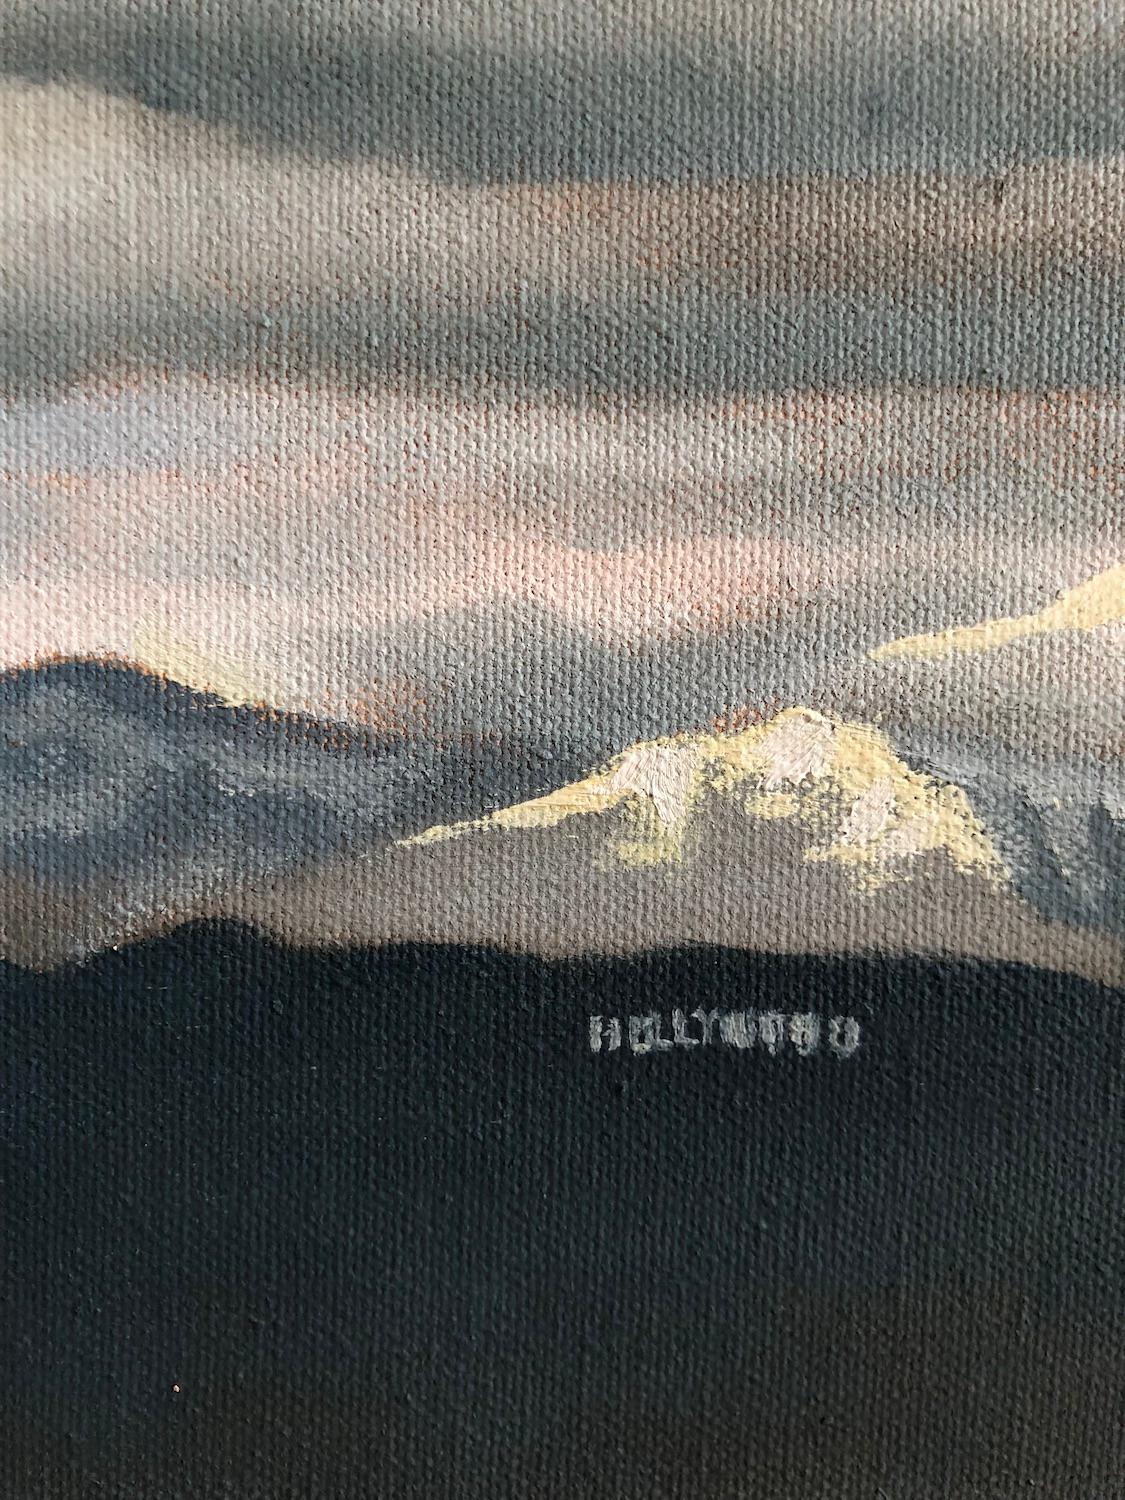 That Time It Snowed on the Hollywood Sign, Oil Painting For Sale 1